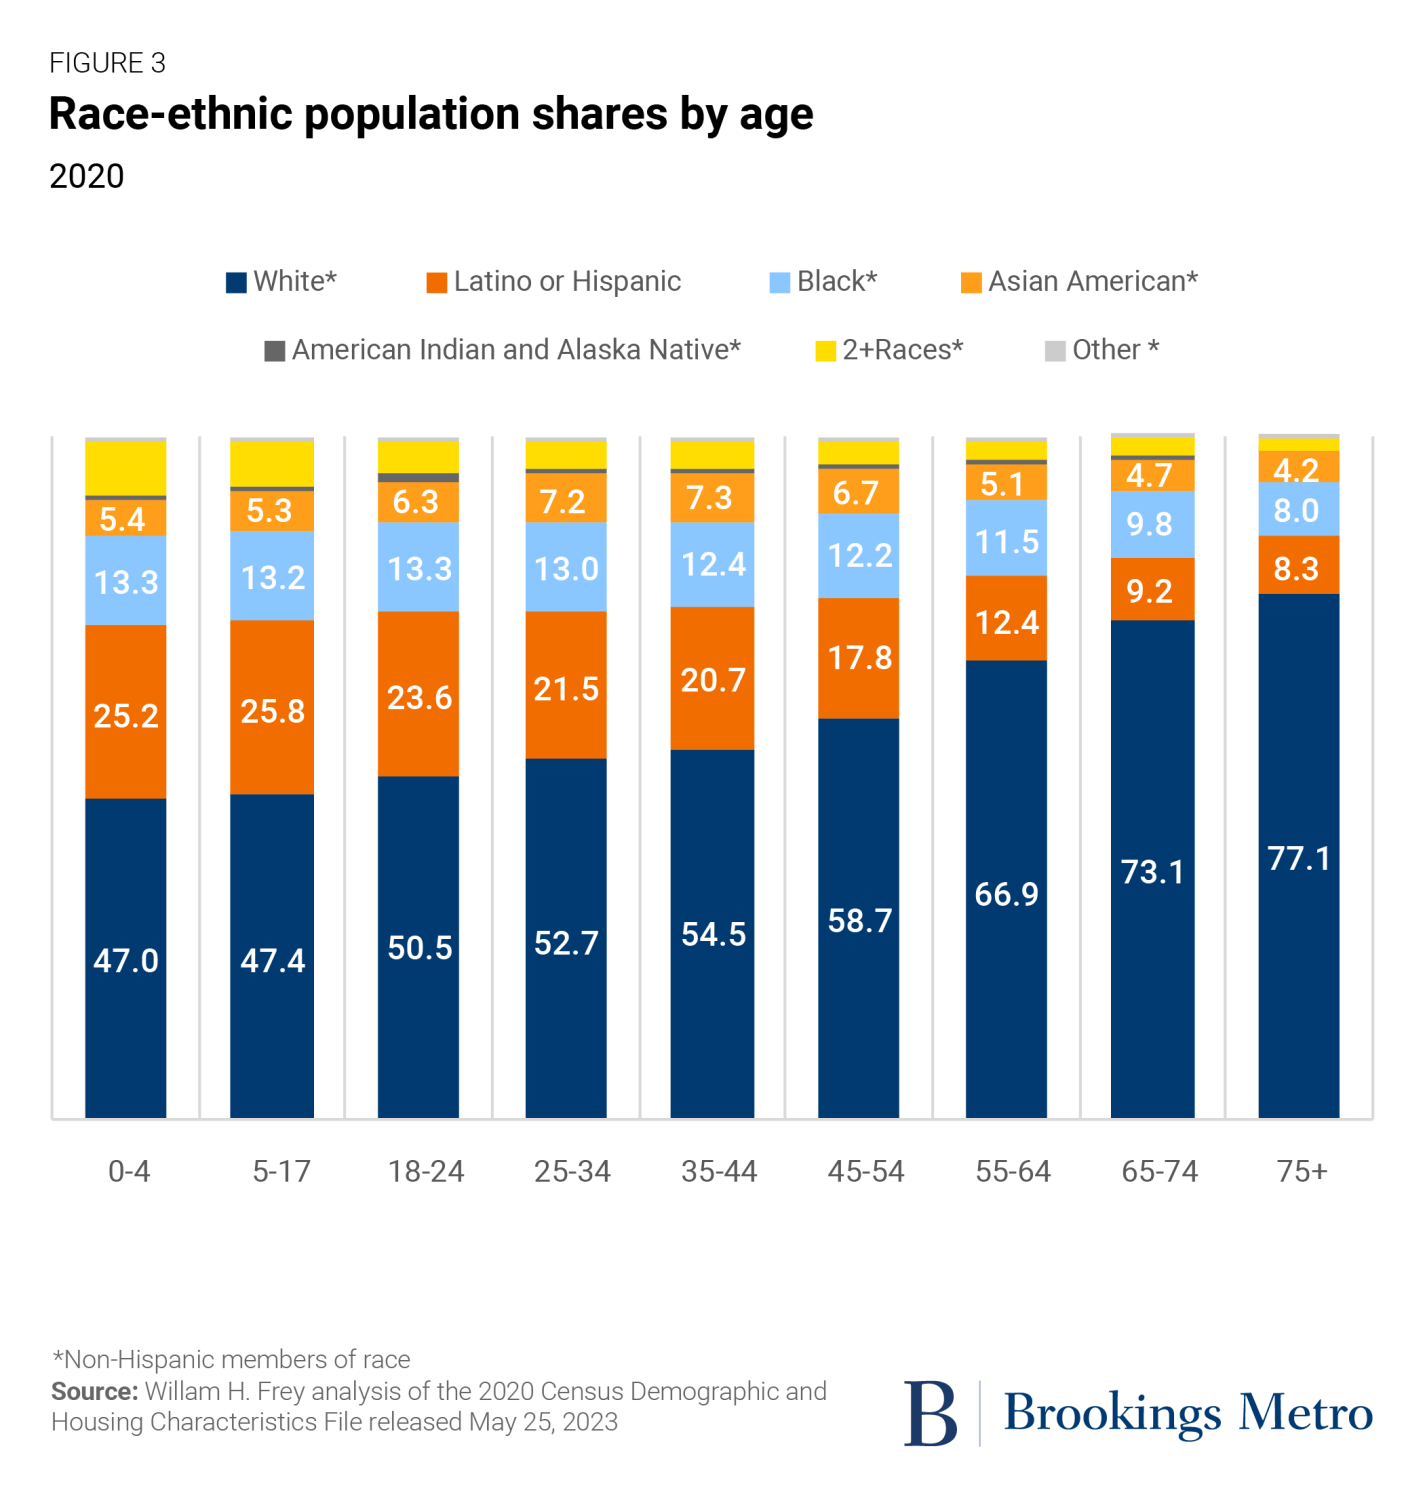 Figure 3: Race-ethnic population shares by age